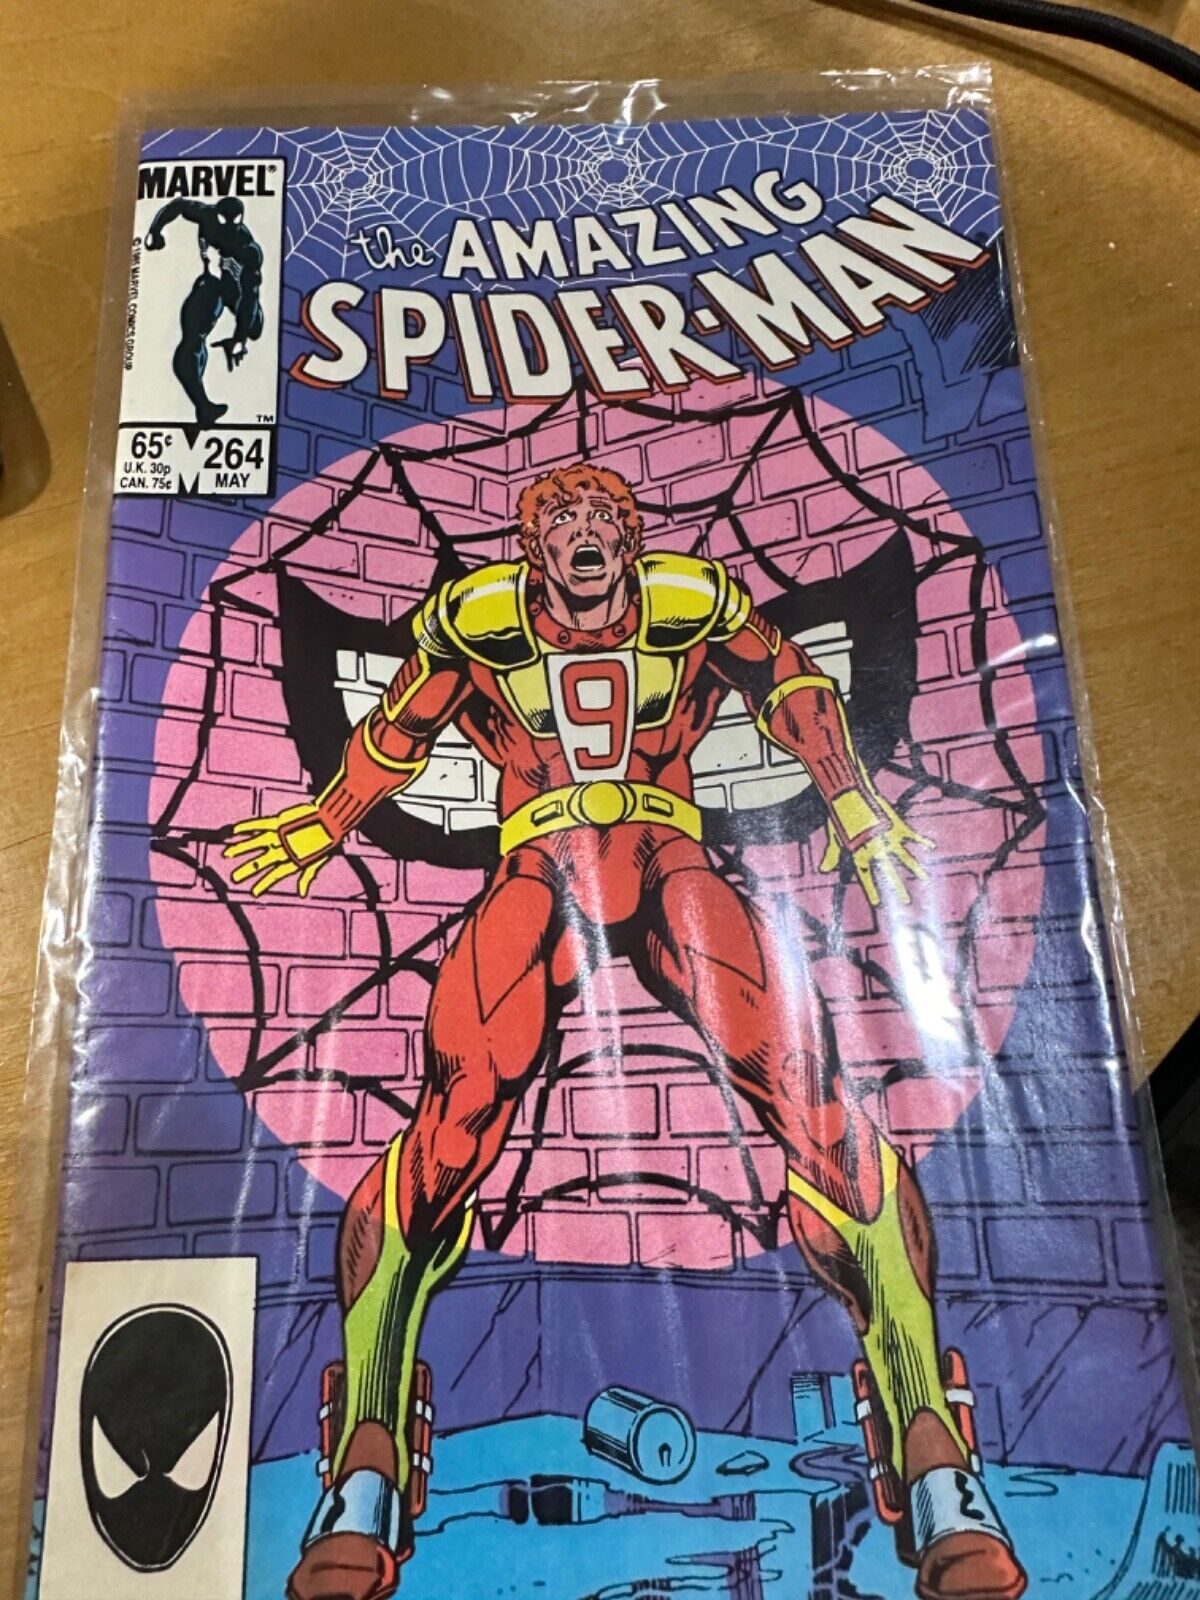 The Amazing Spider-Man #264 - May 1985 - Vol.1 